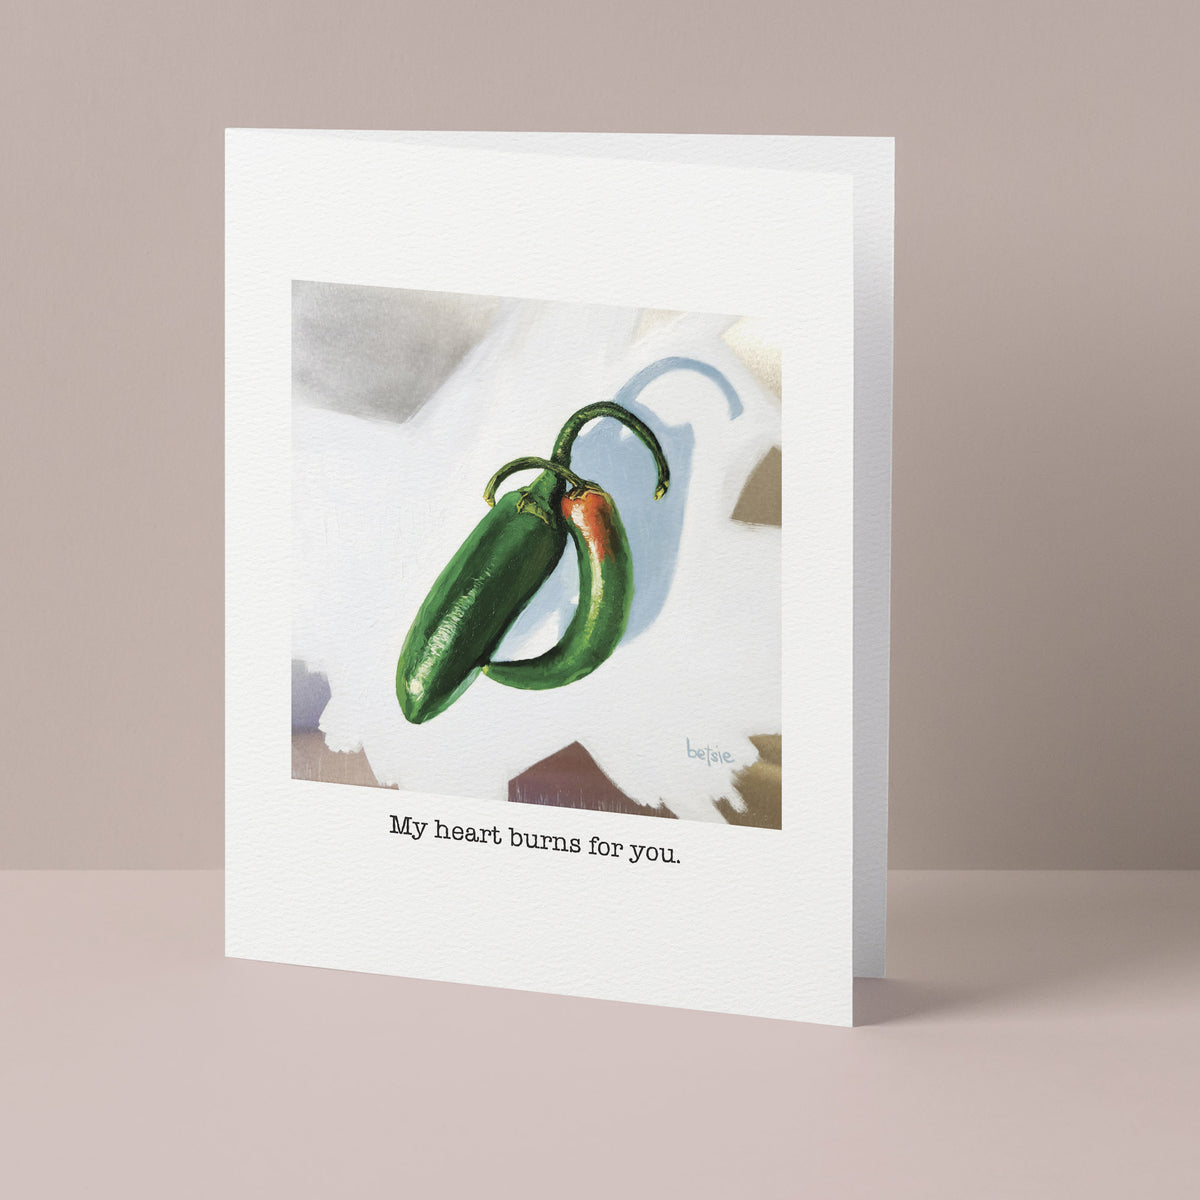 "My heart burns for you" Greeting Card